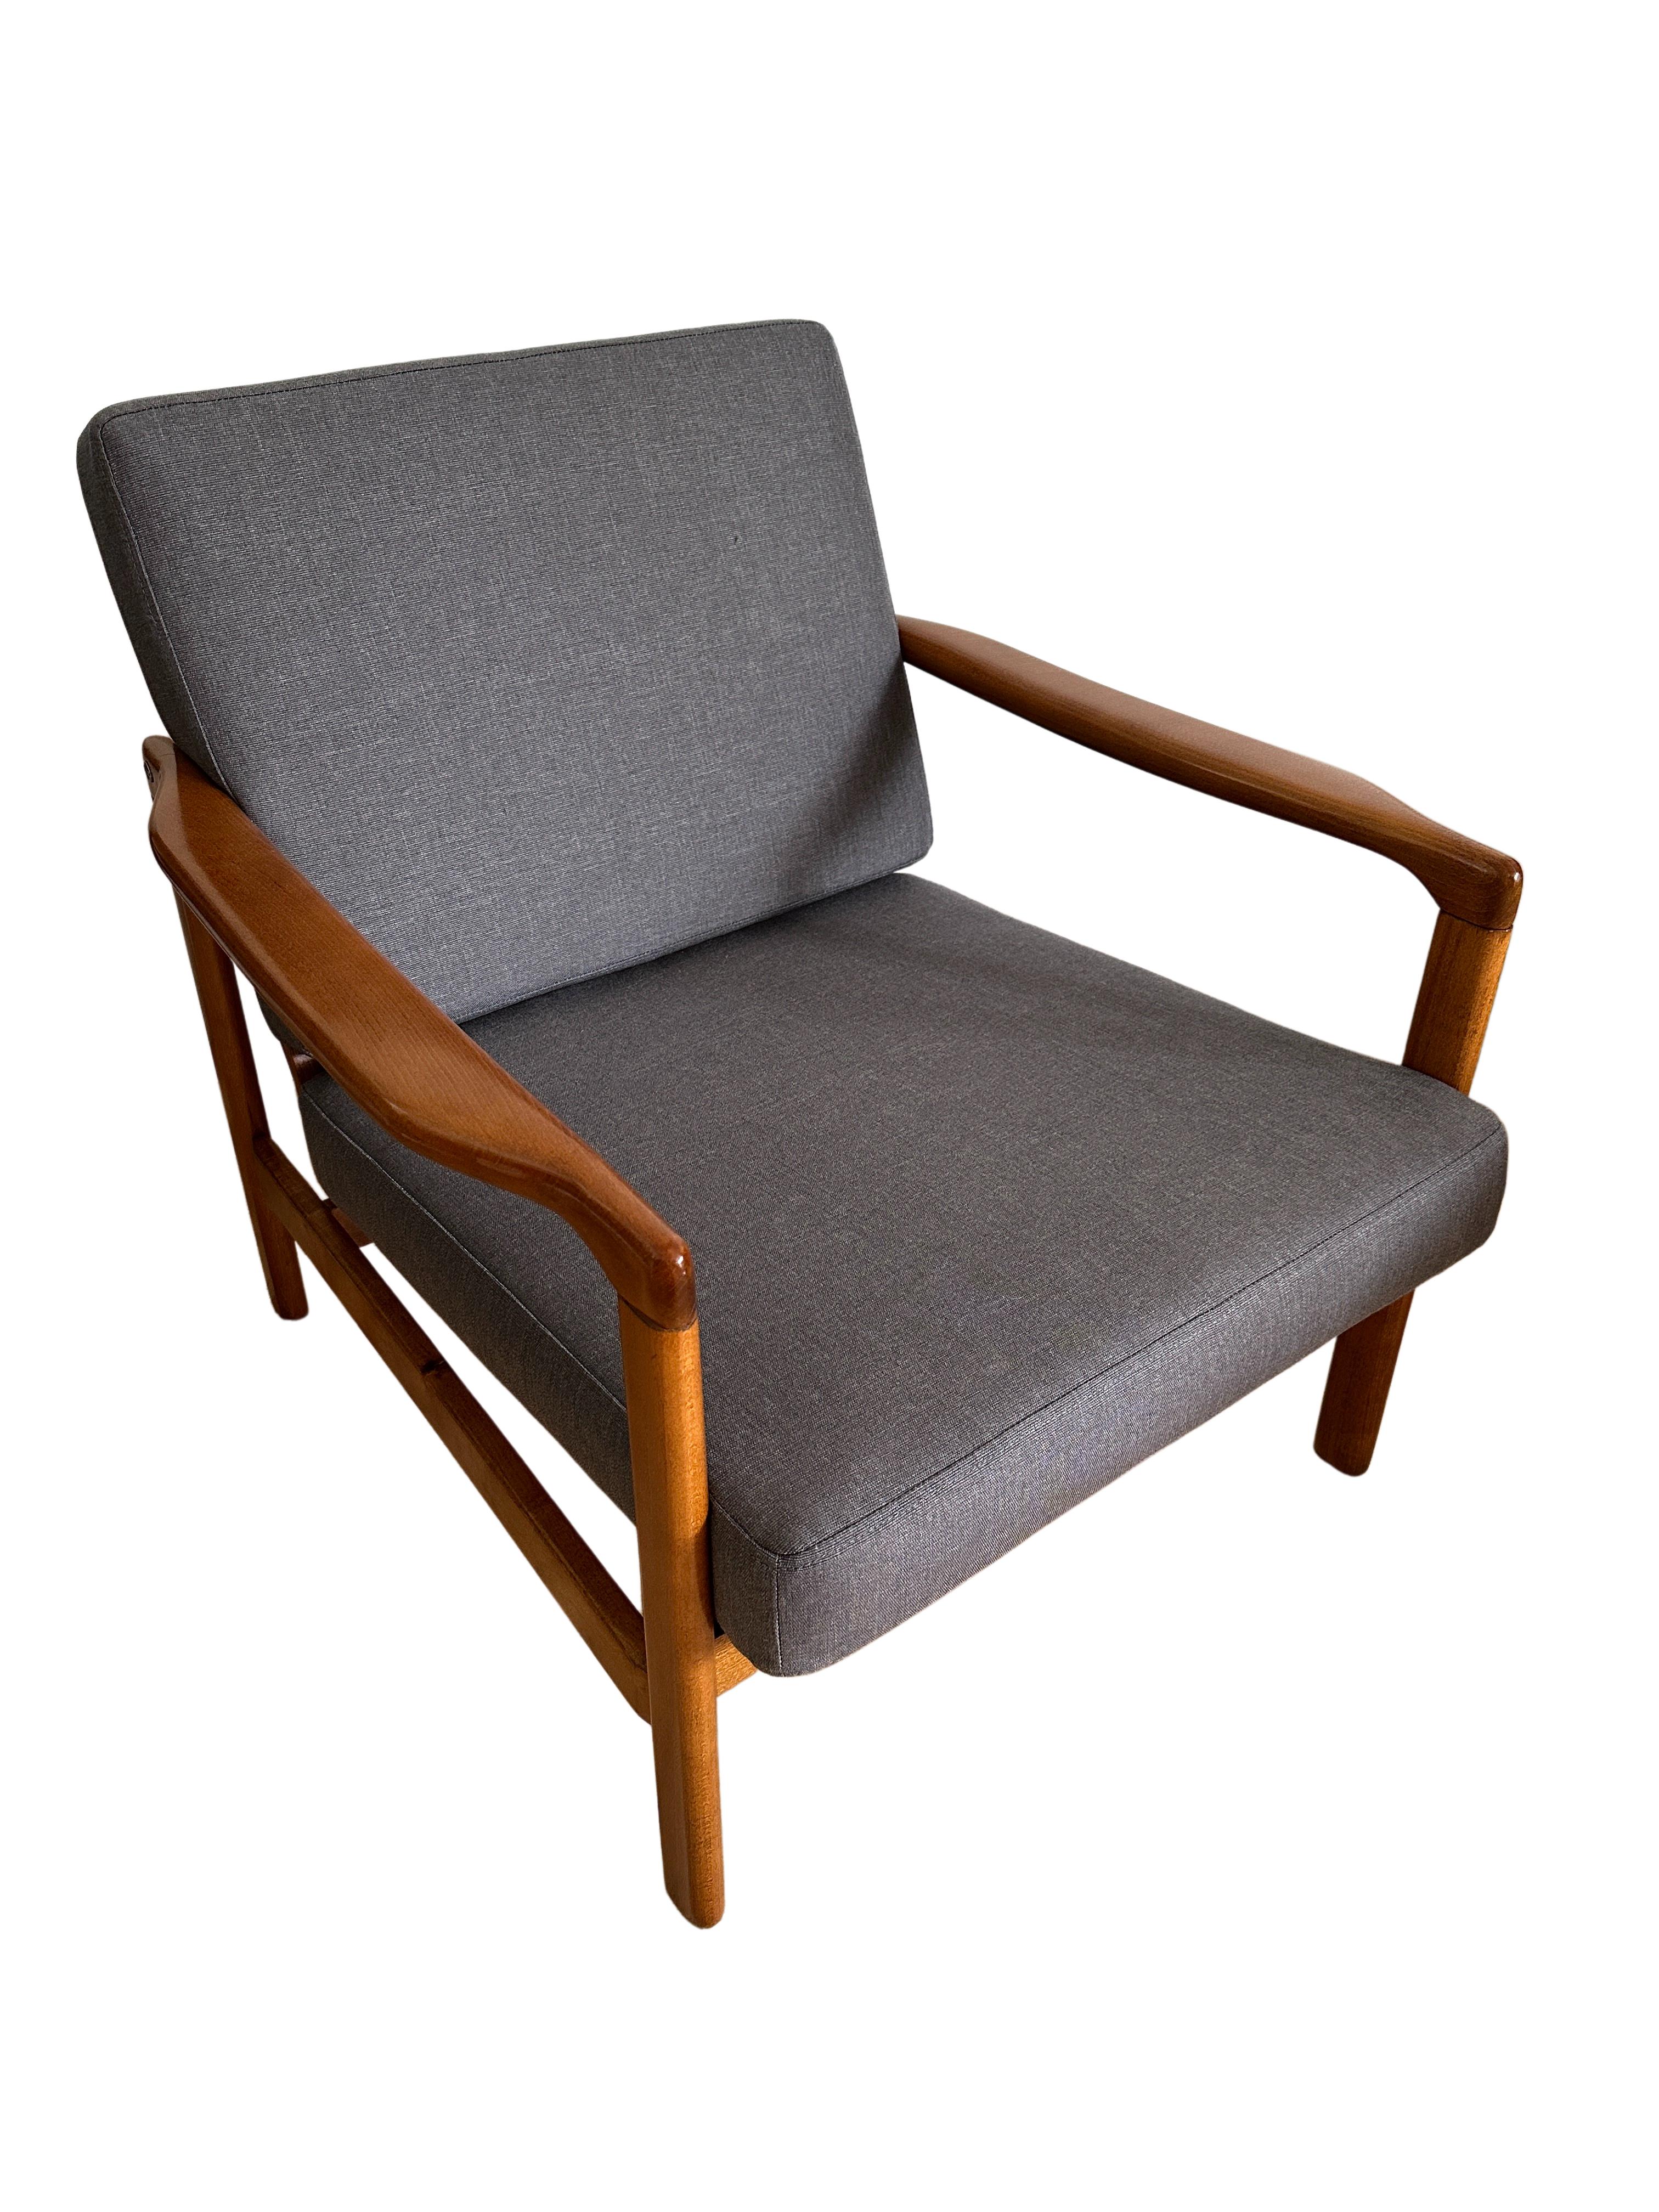 Mid-Century Armchair, Wood and Grey Kvadrat Upholstery, Europe, 1960s For Sale 2